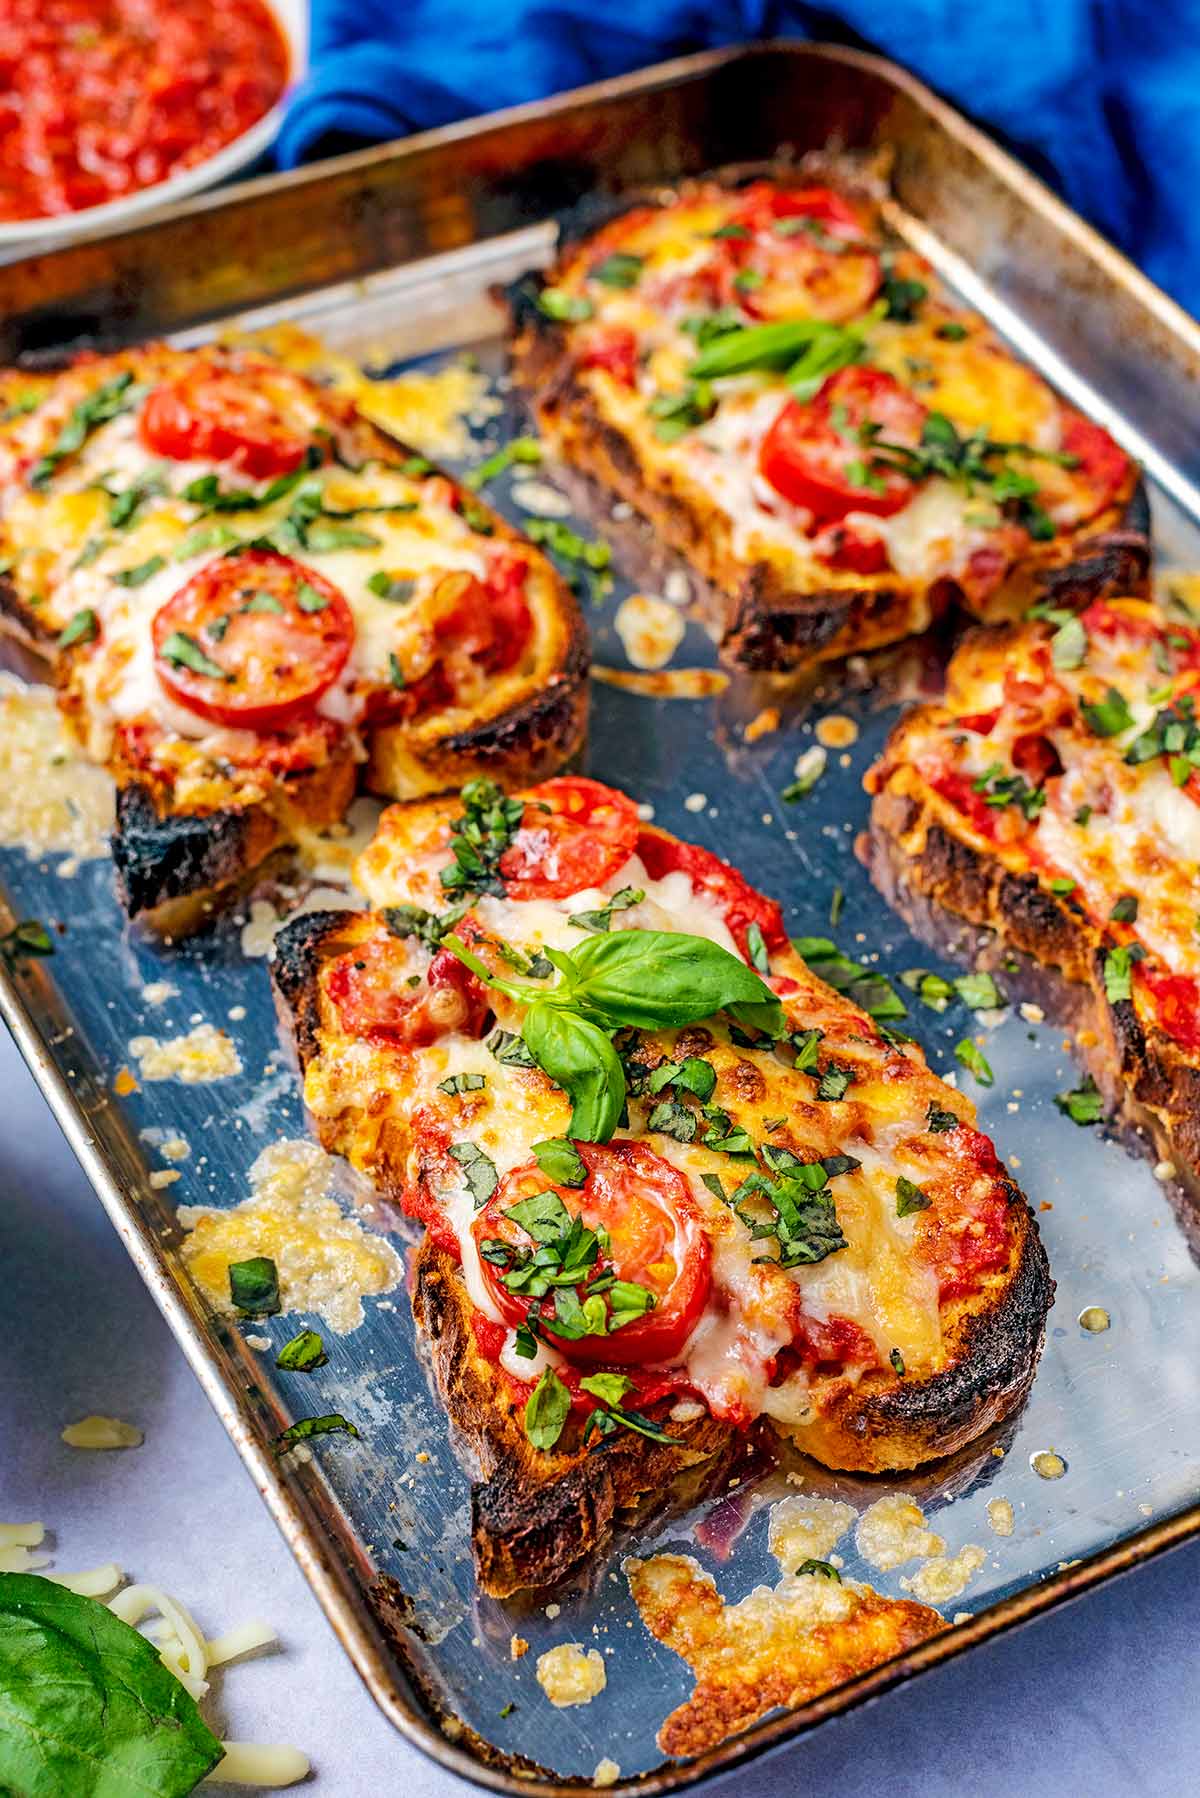 Slices of pizza toast topped with basil leaves.